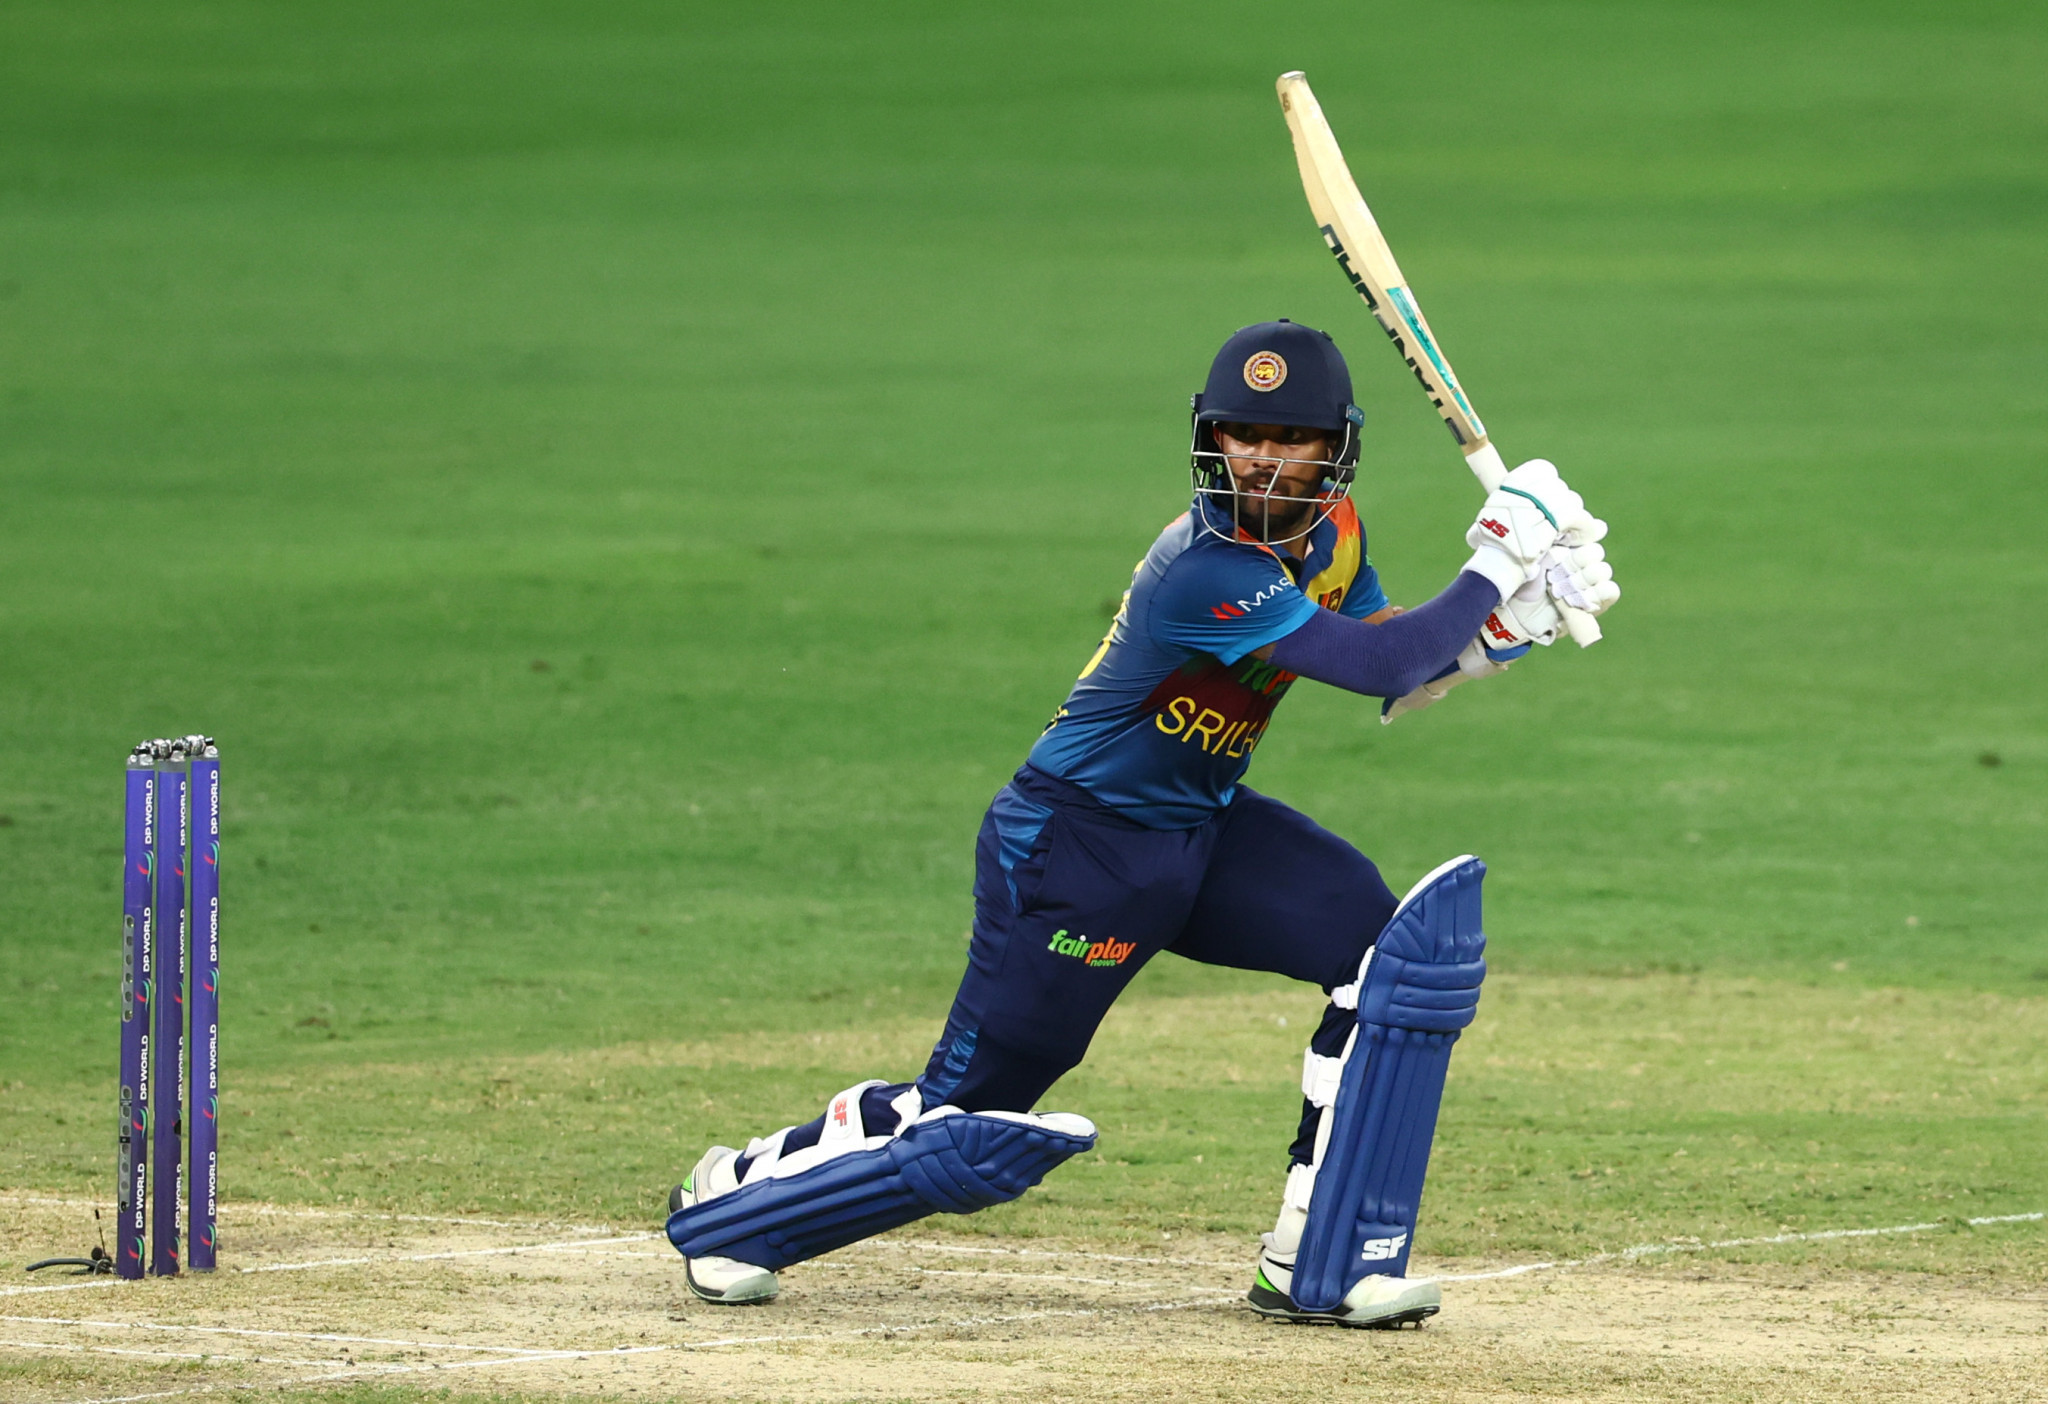 Kusal Mendis scored his ninth T20 international half-century against The Netherlands ©Getty Images